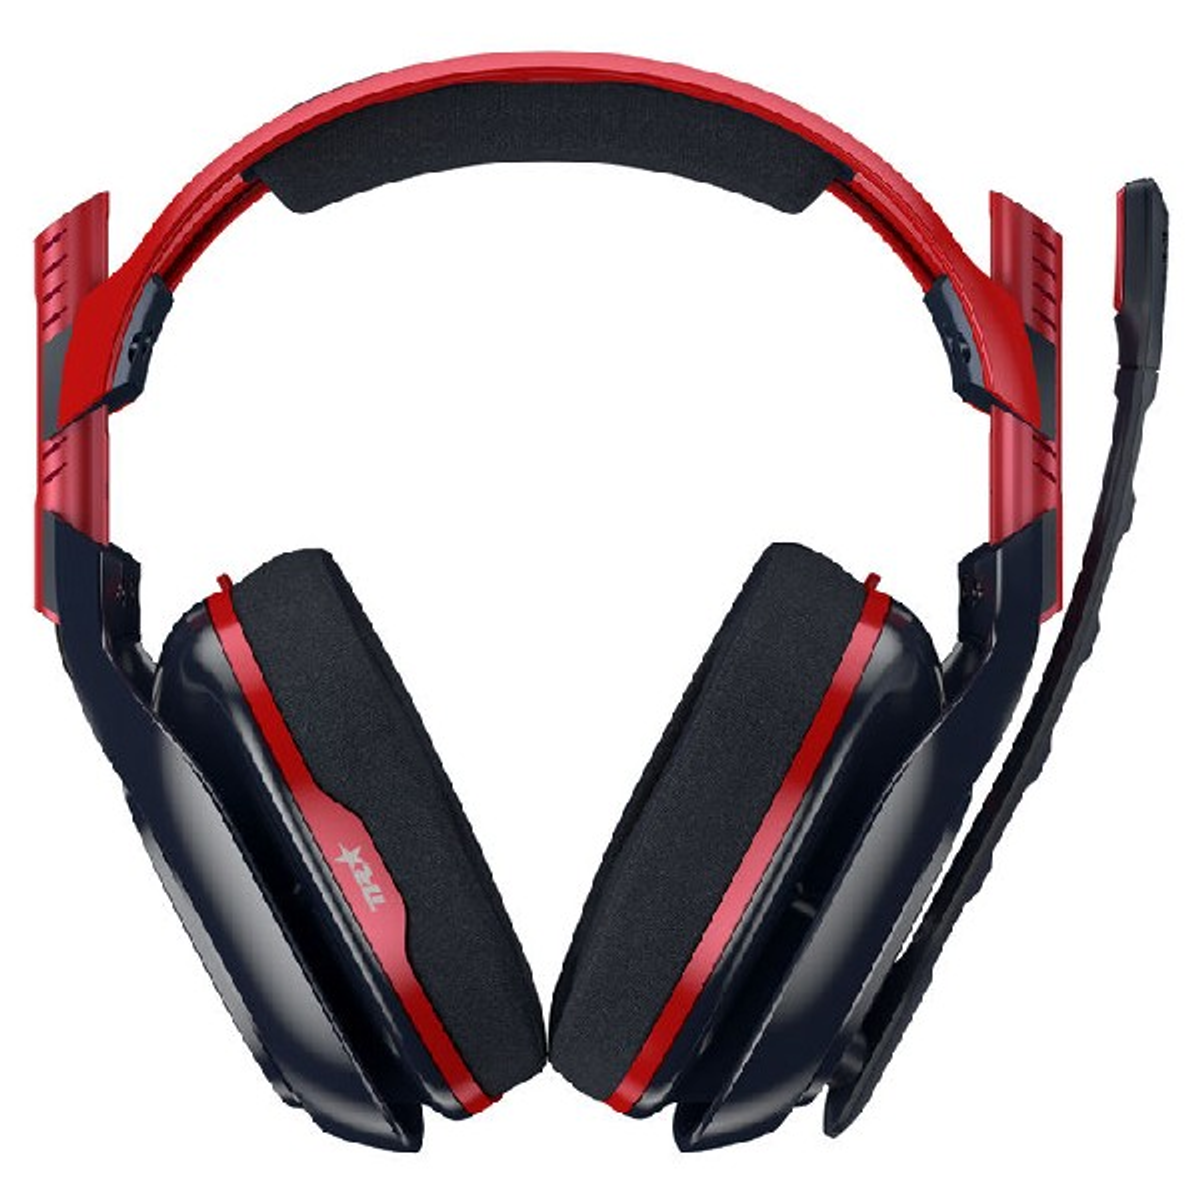 ASTRO 939-001668 Over-ear RED/BLUE, 10TH Headset A40 ANNIVERSARY EDS Rot/Blau TR Gaming